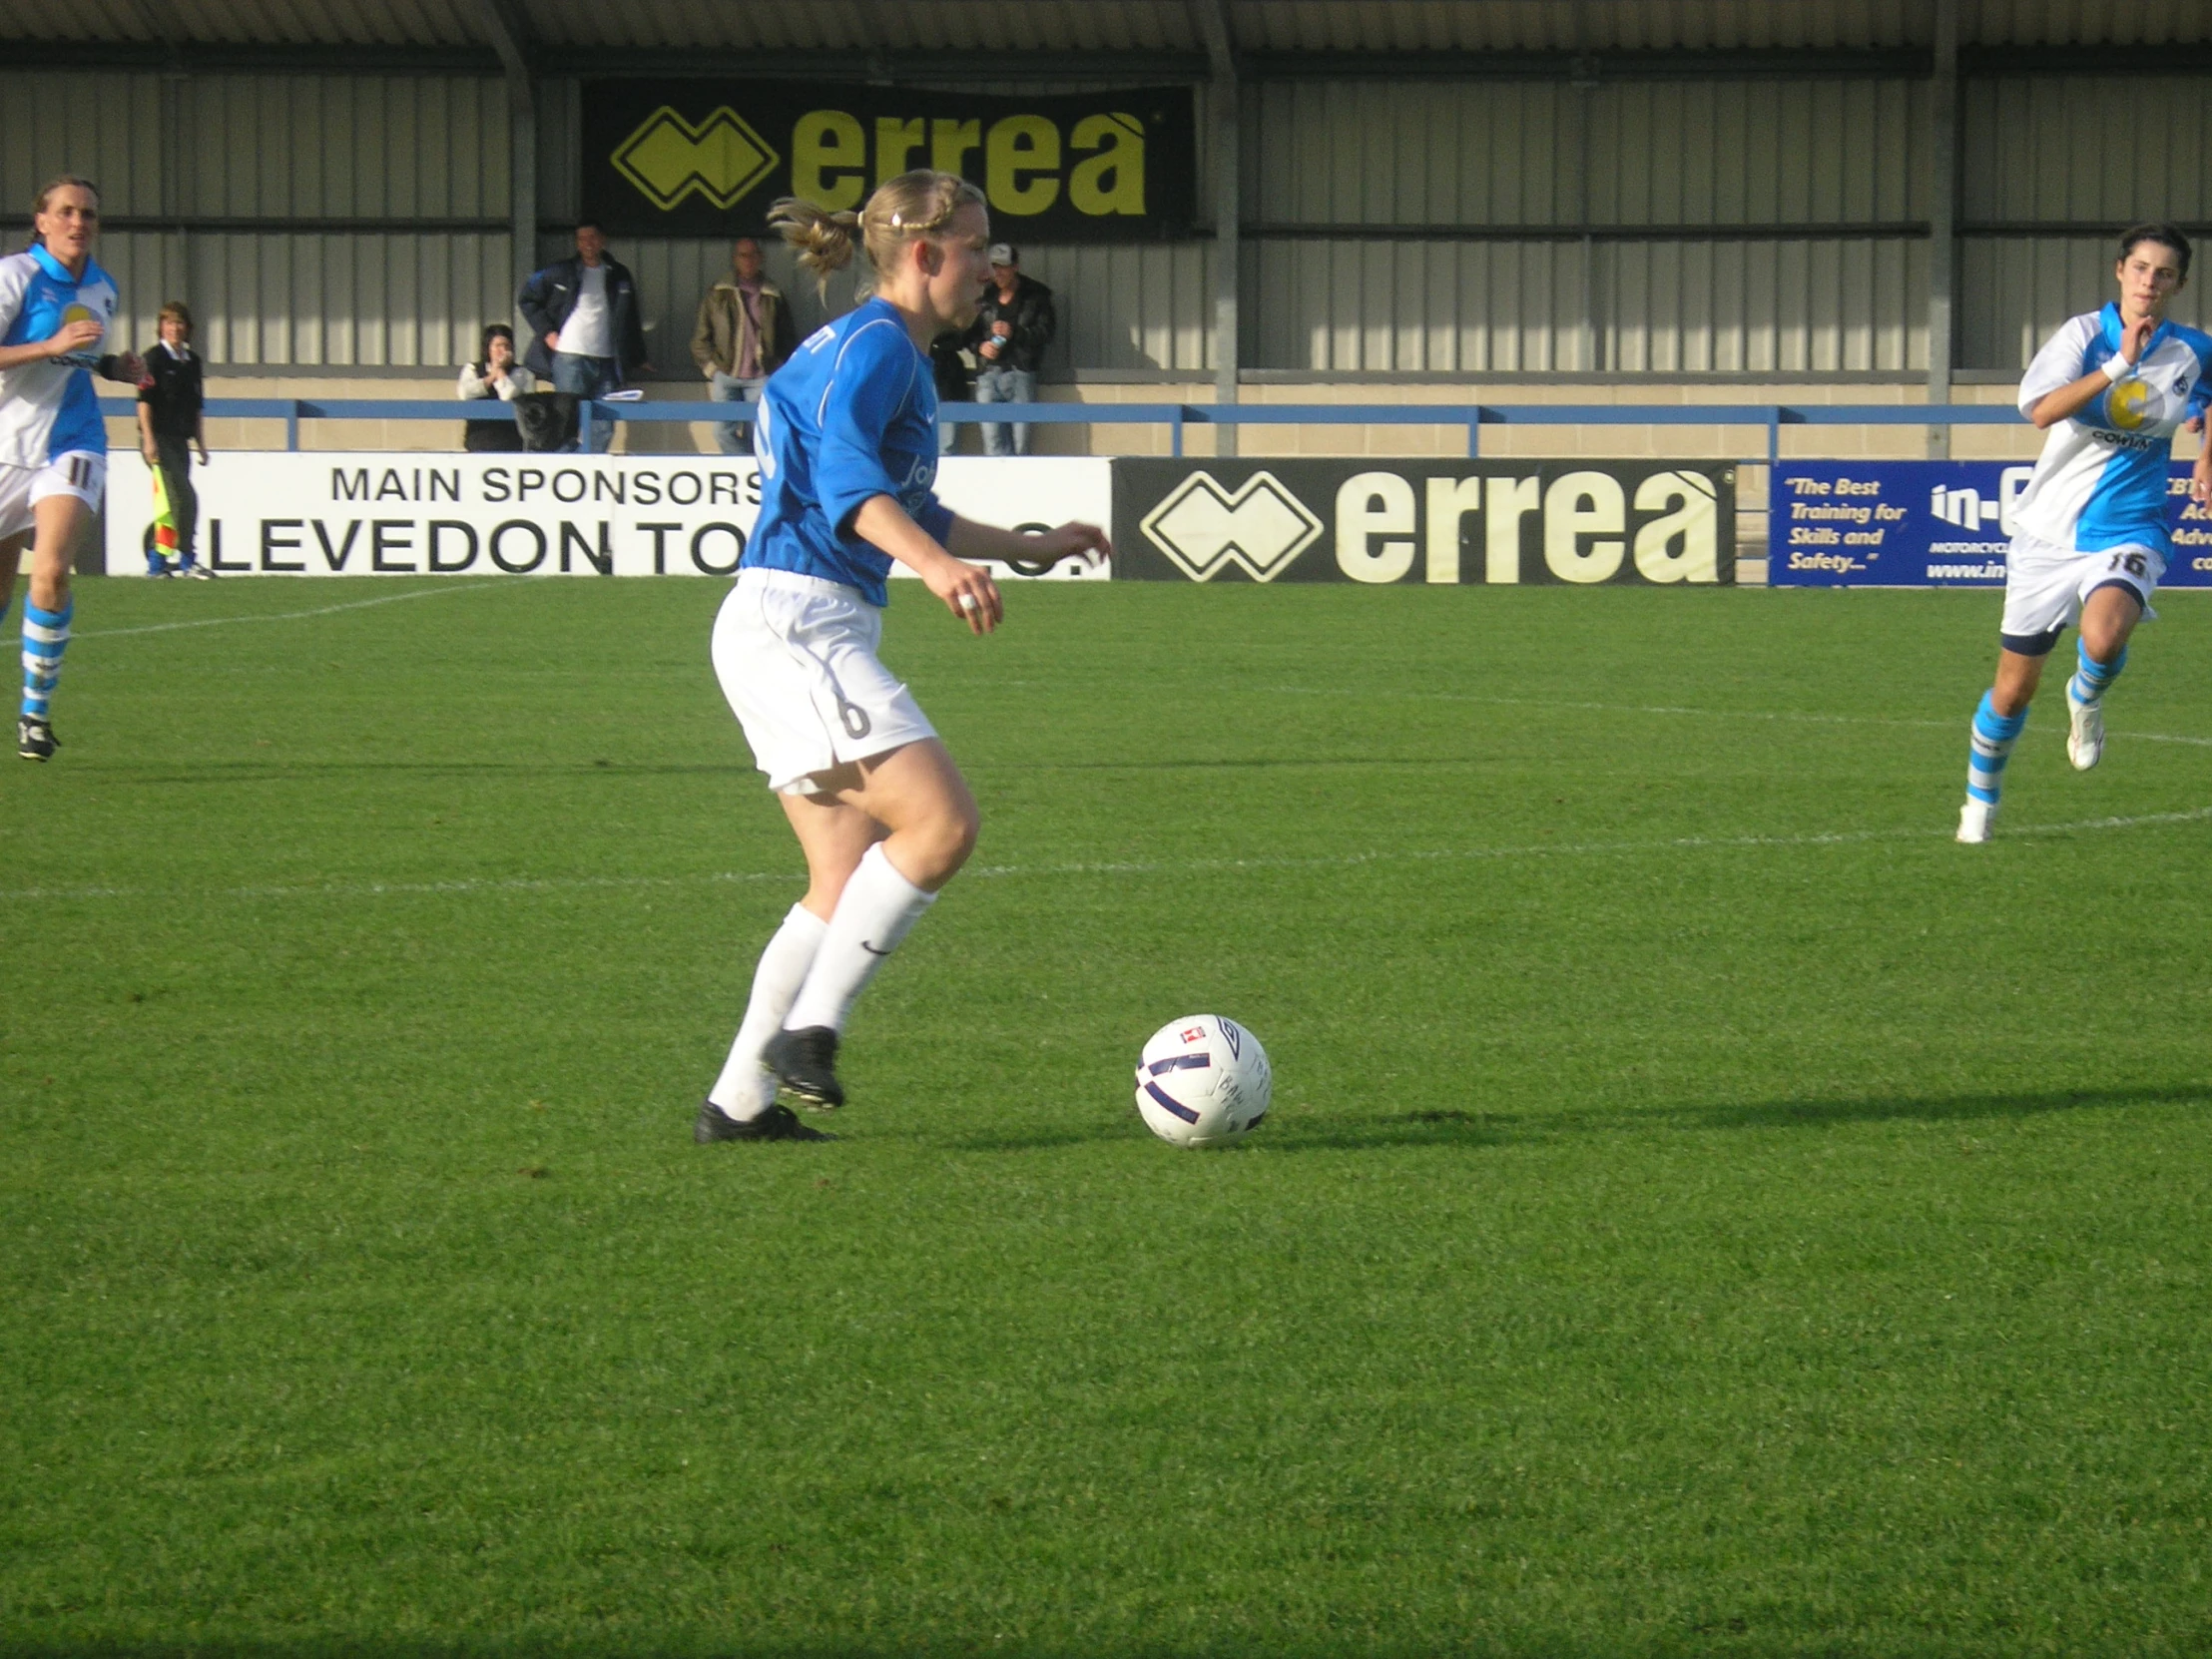 a woman in blue and white uniform kicking a soccer ball